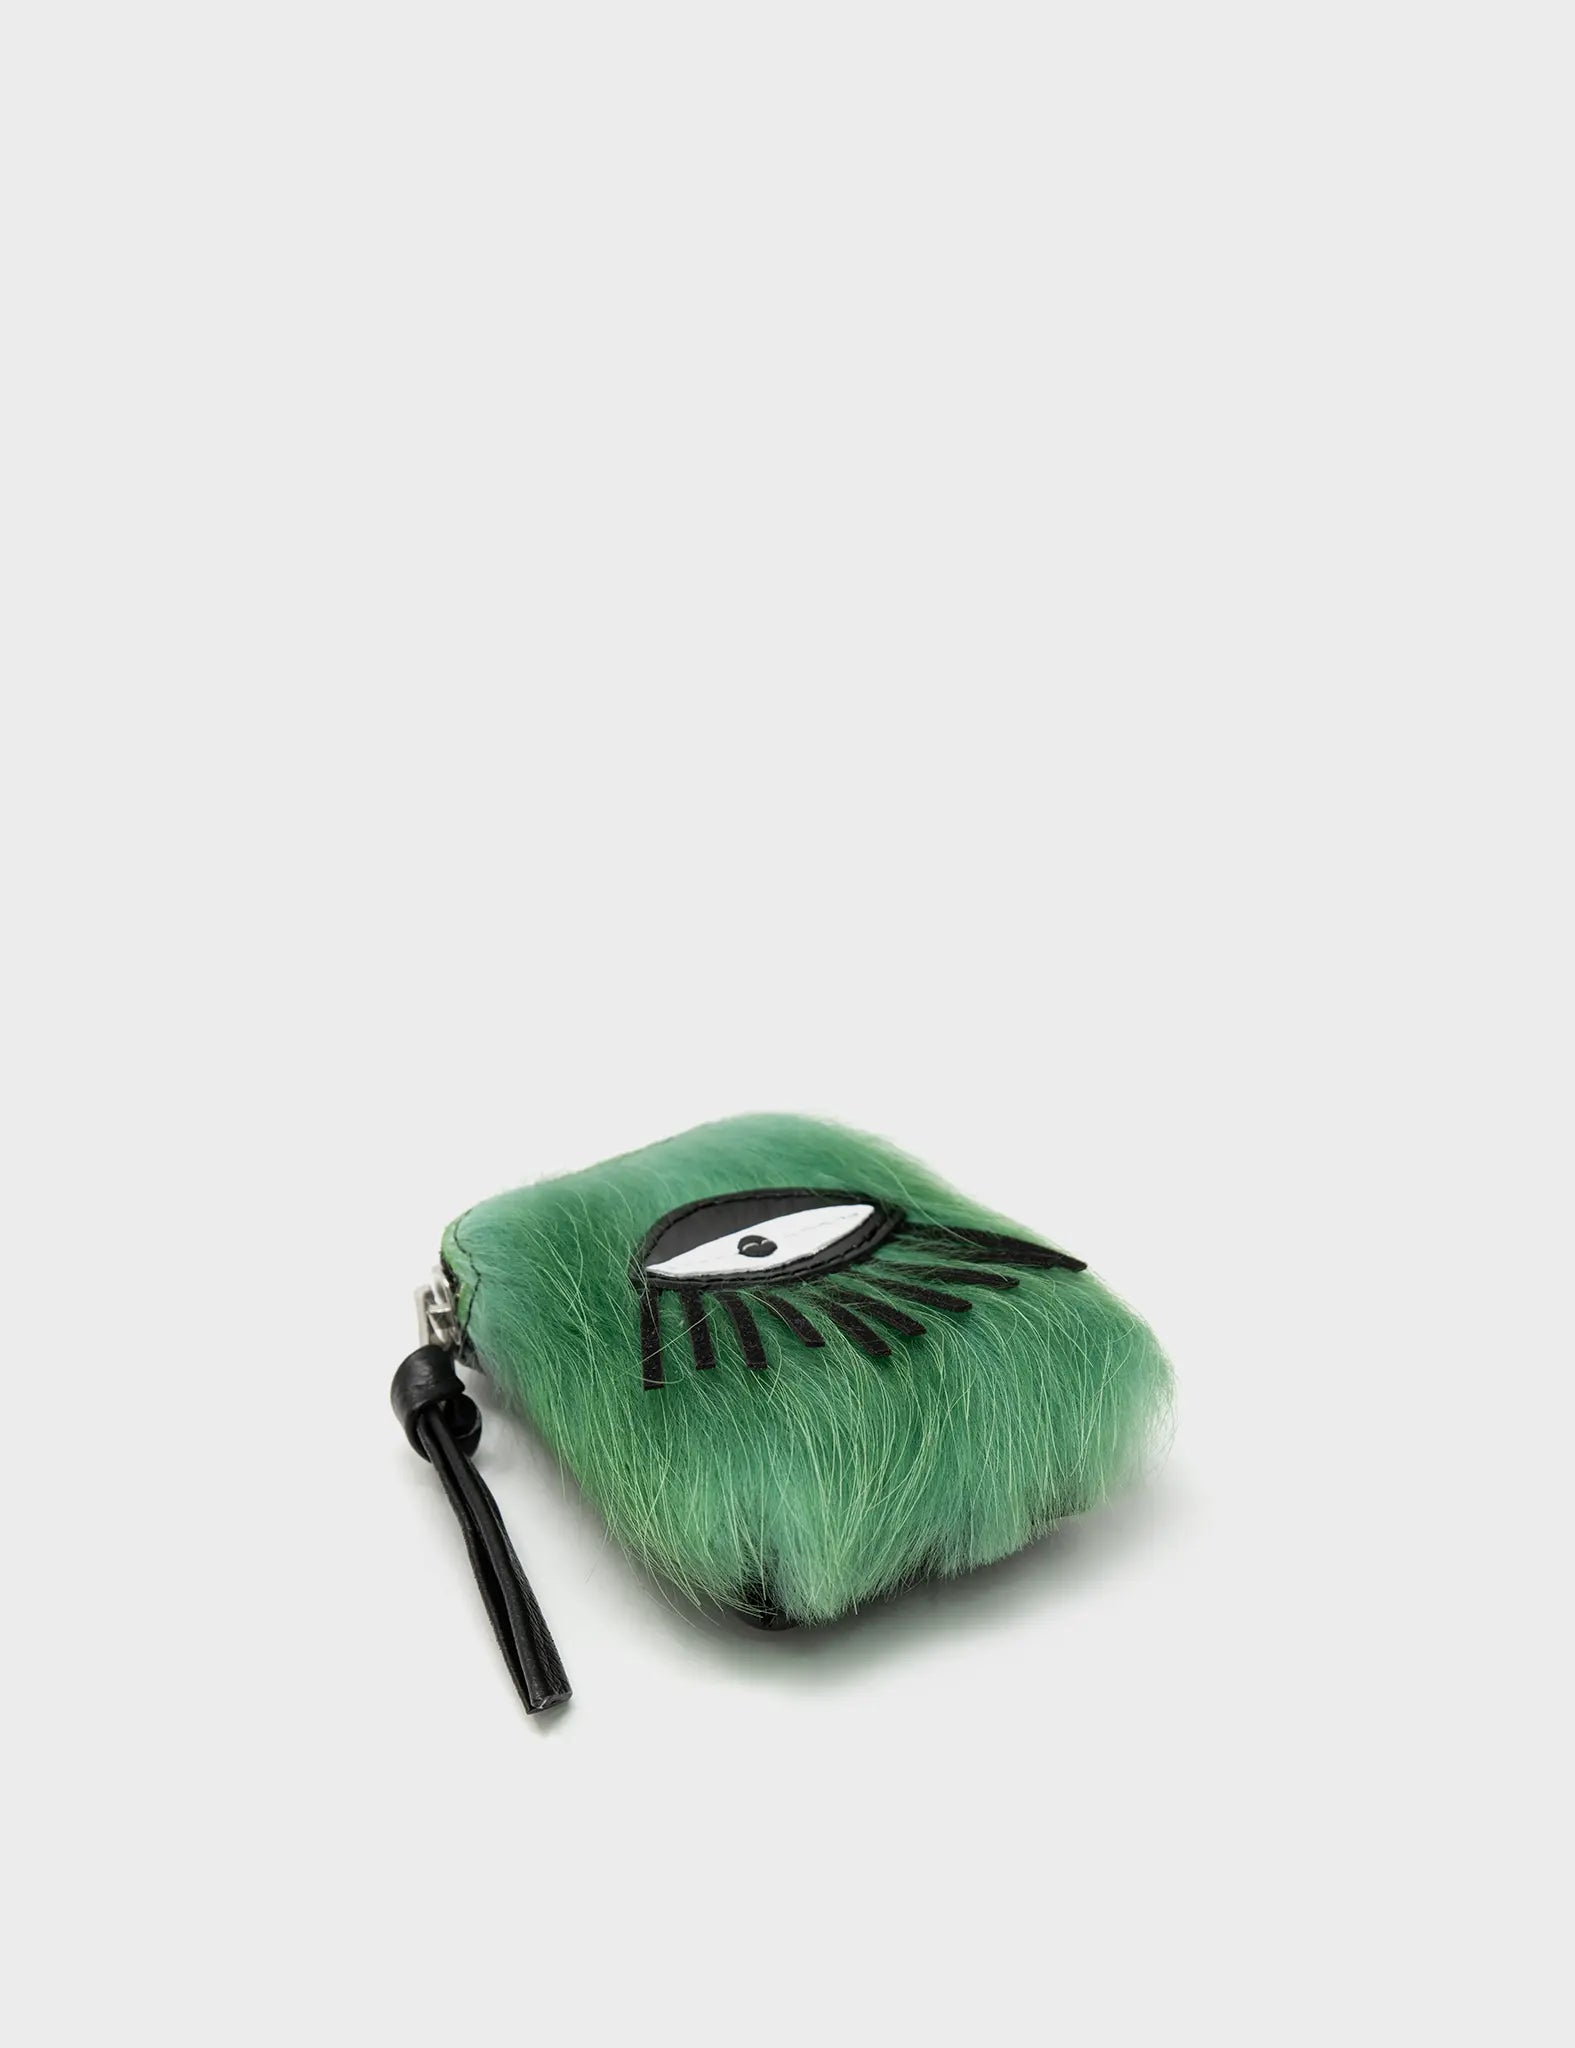 Florence Pouch Charm - Green Fur Leather Keychain Eye Applique - Front corner angle view